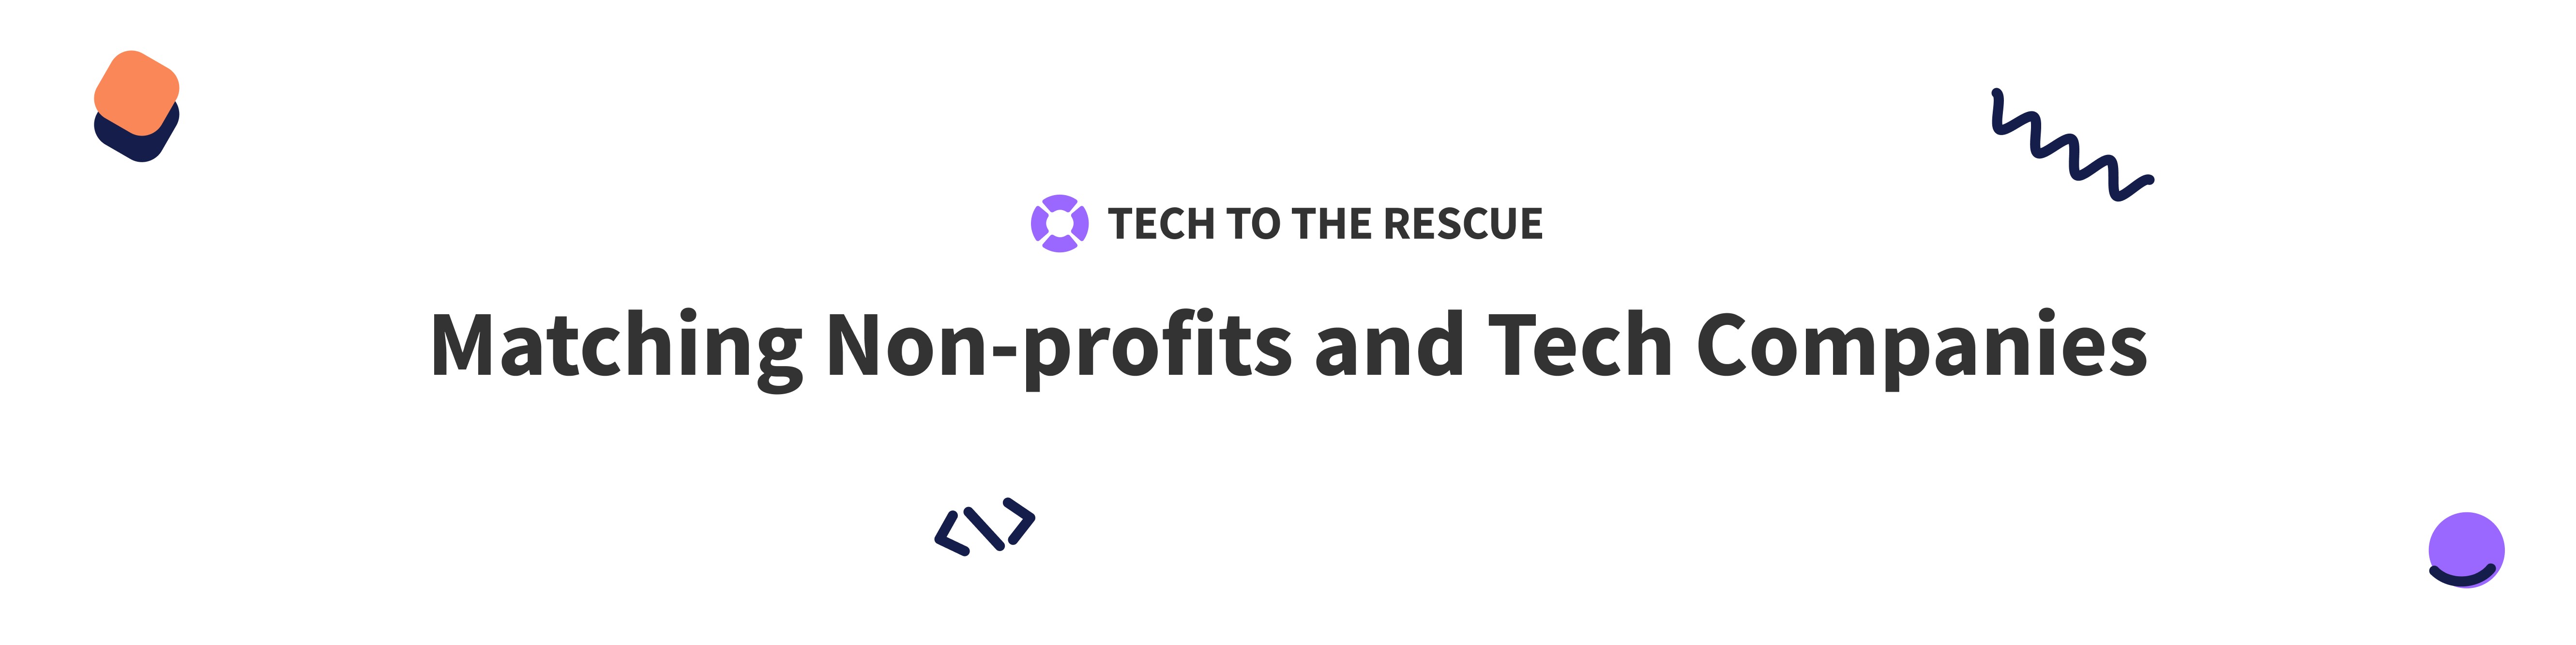 Tech To The Rescue | LinkedIn